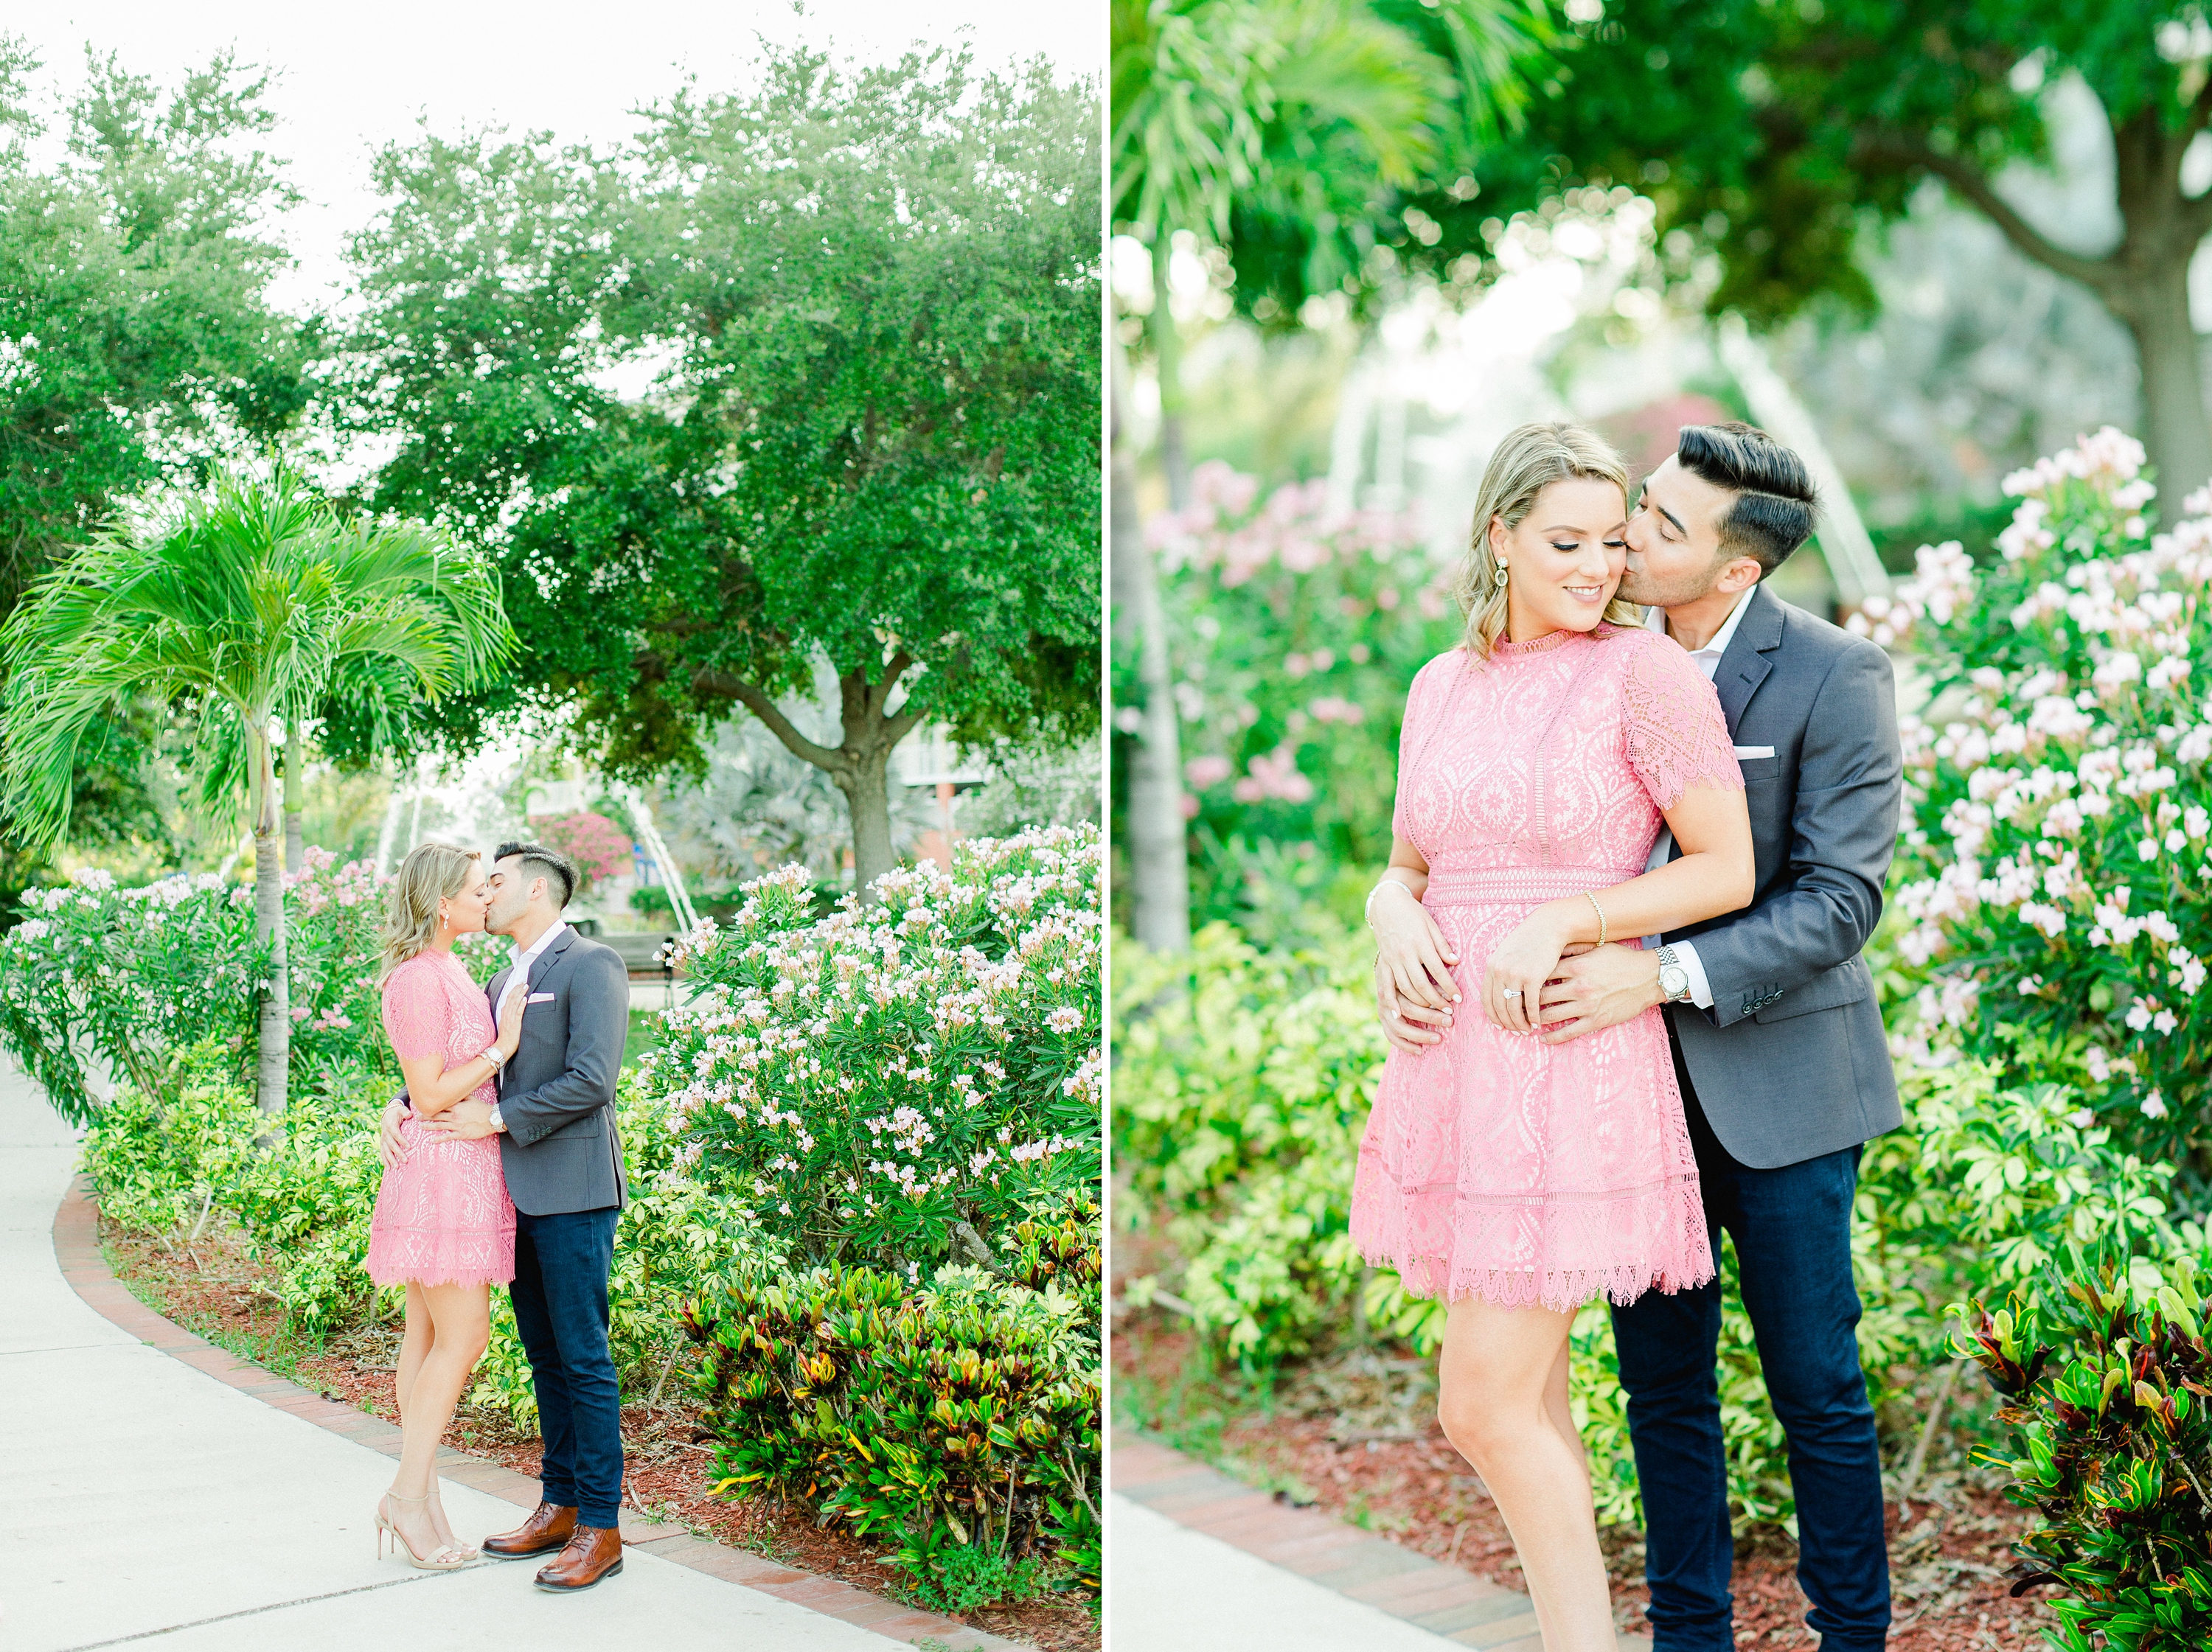 Tampa Engagement Photographer | © Ailyn La Torre Photography 2019